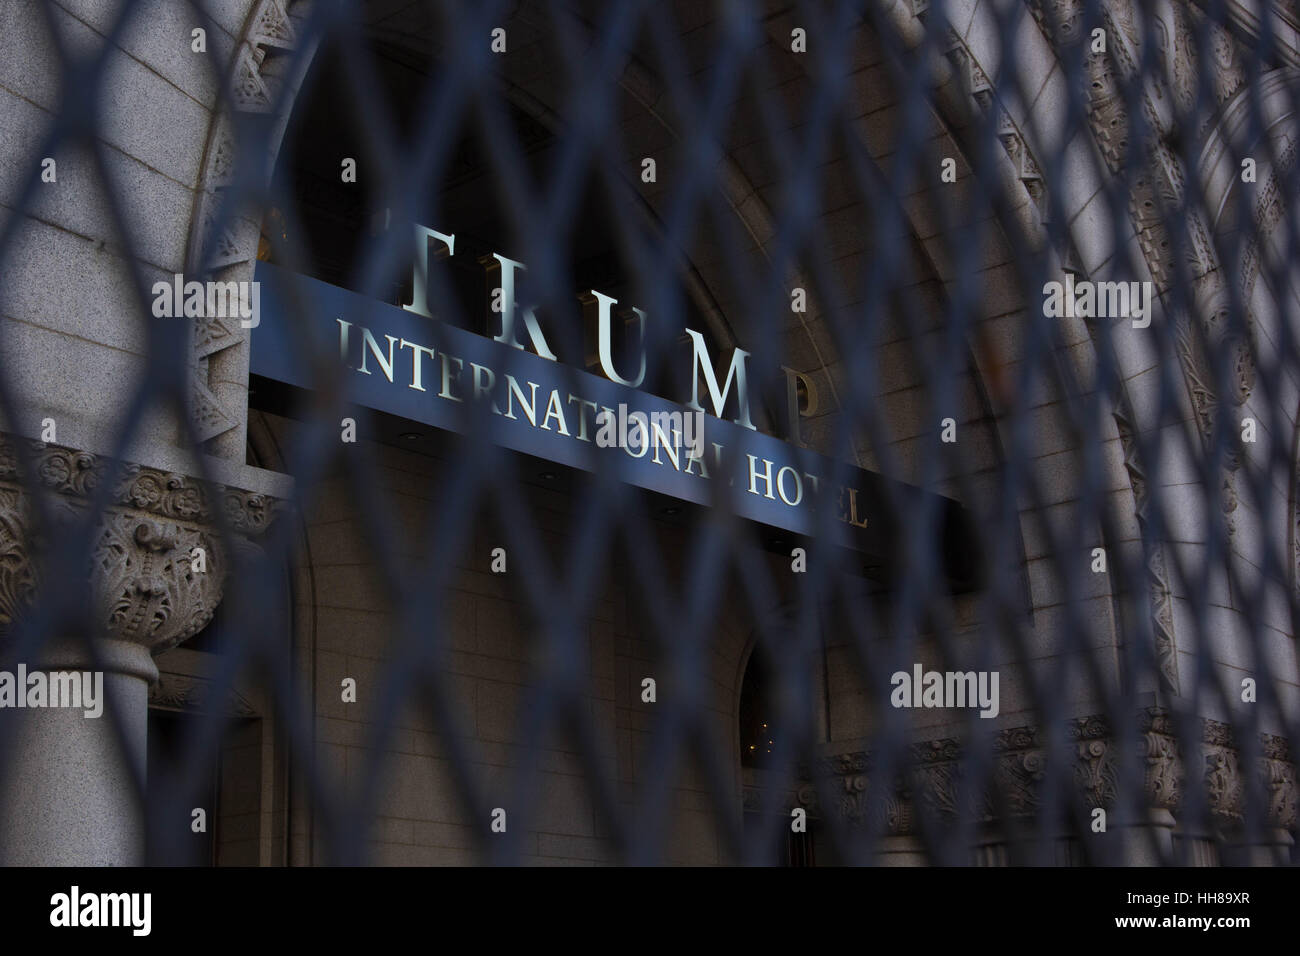 Washington DC, USA. 18th January 2017. The Trump International Hotel, recently opened along the Inaugural parade route, is seen behind protective fencing, Wednesday, January 18, 2017. Credit: Michael Candelori/Alamy Live News Stock Photo